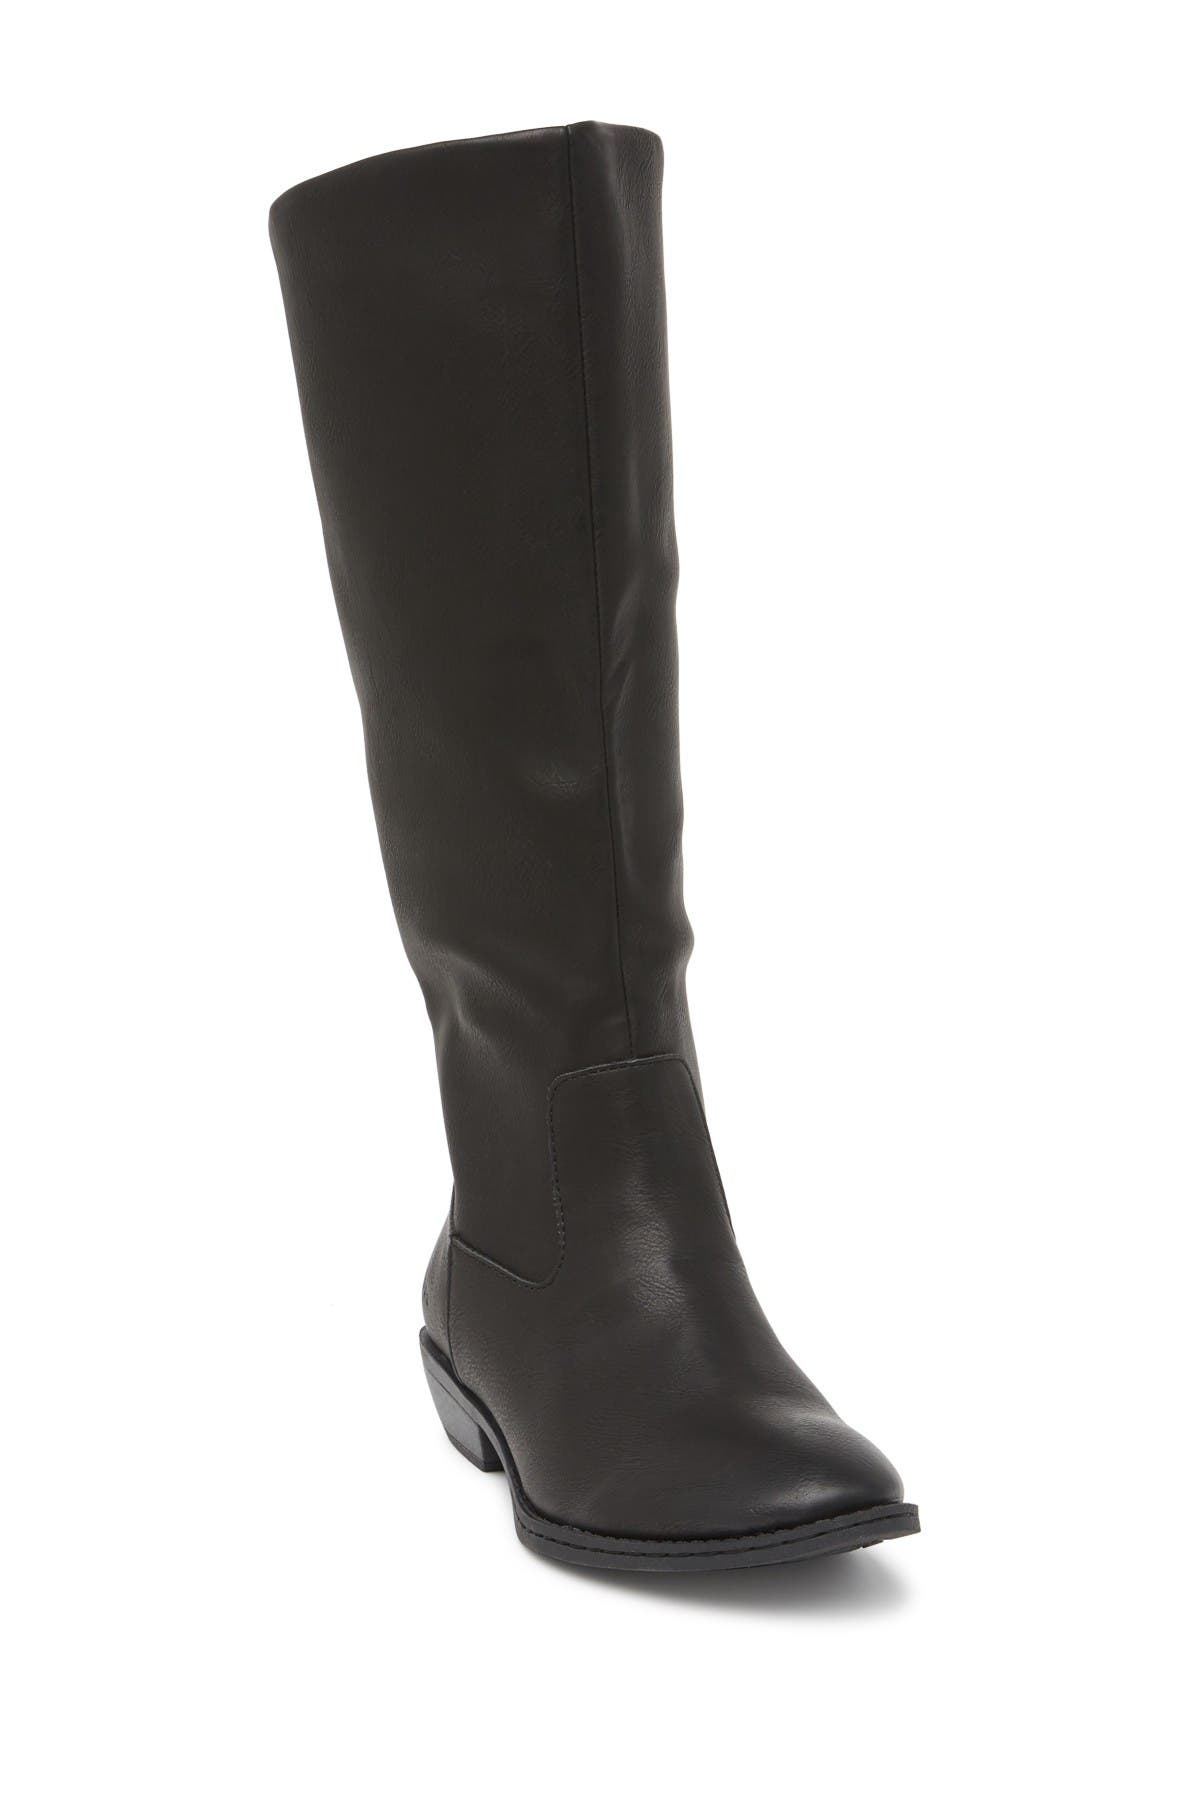 nordstrom black tall boots